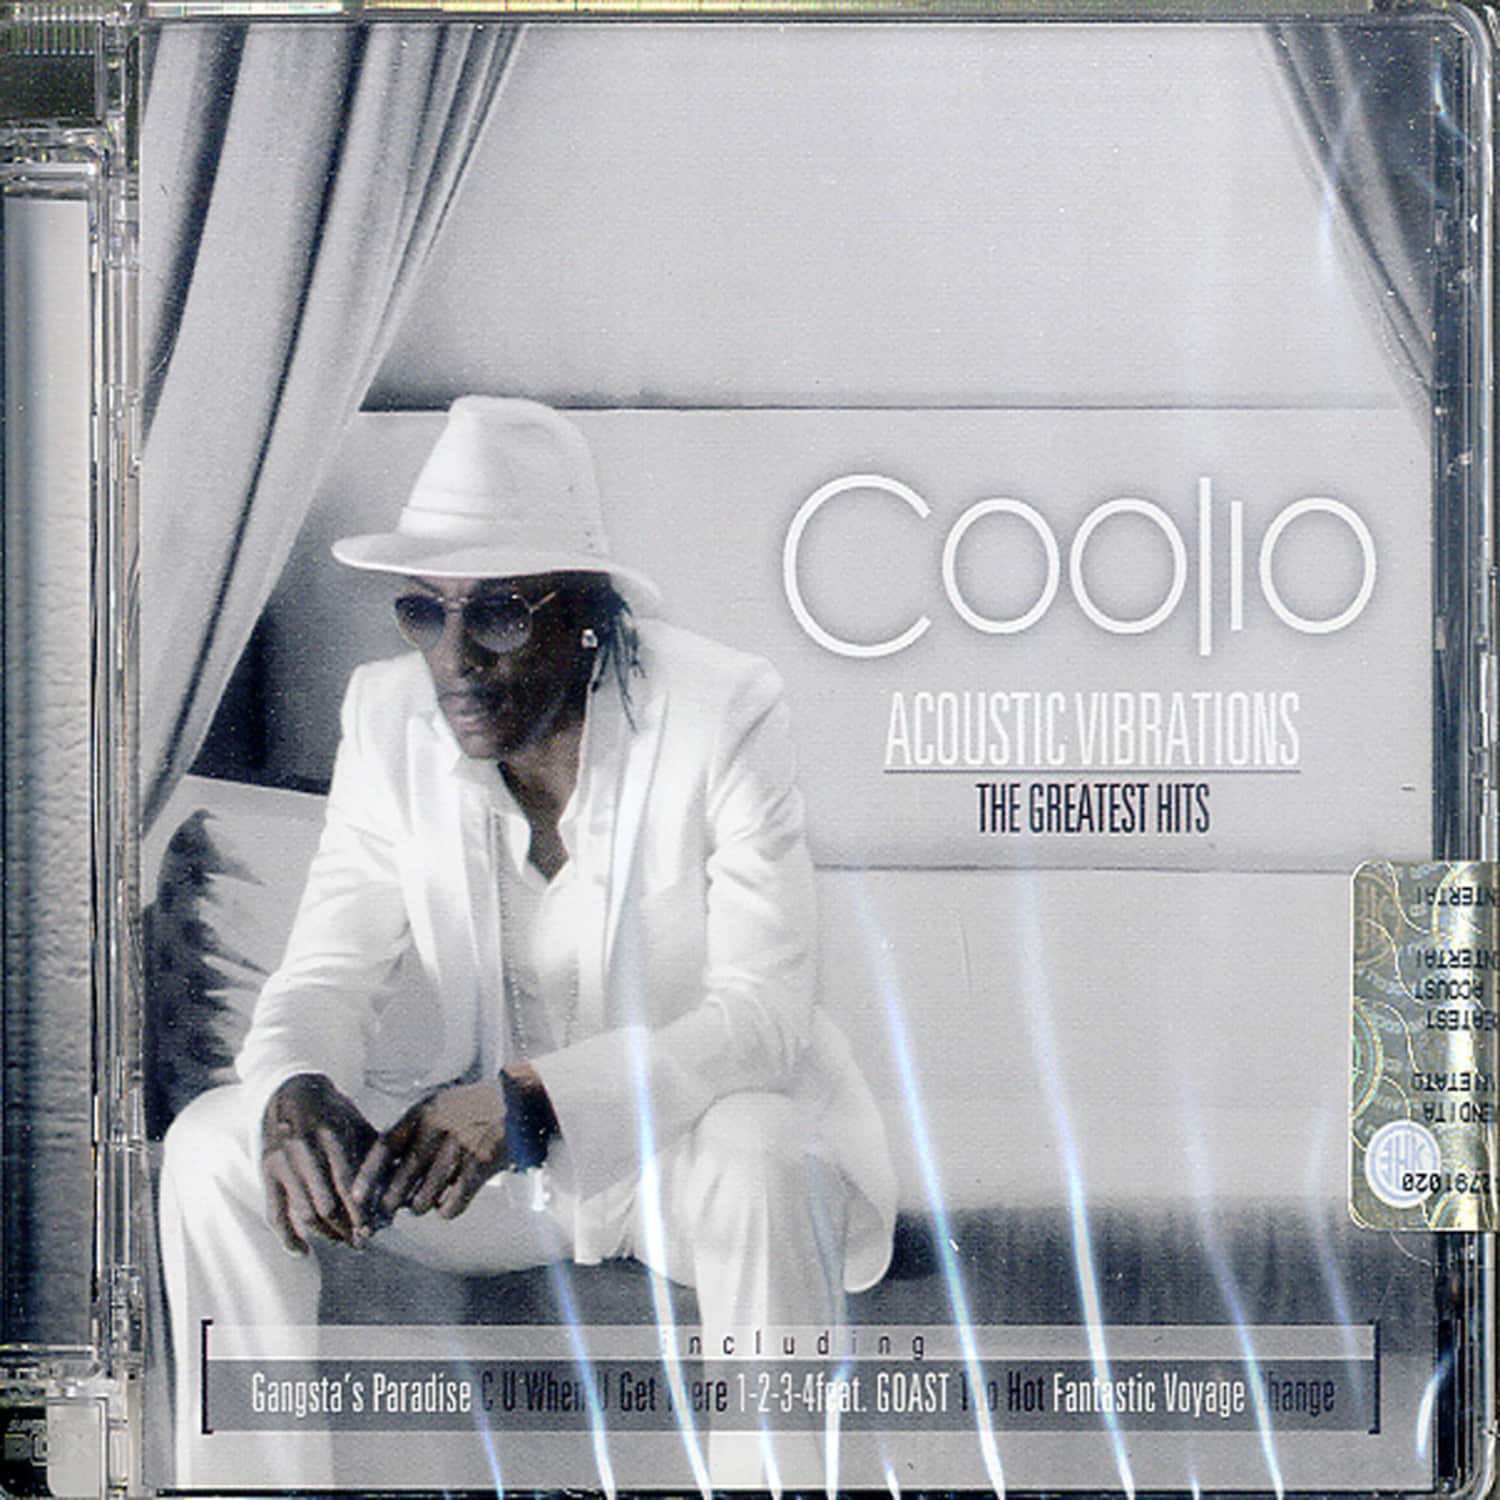 Coolio - ACOUSTIC VIBRATIONS - THE GREATEST HITS 